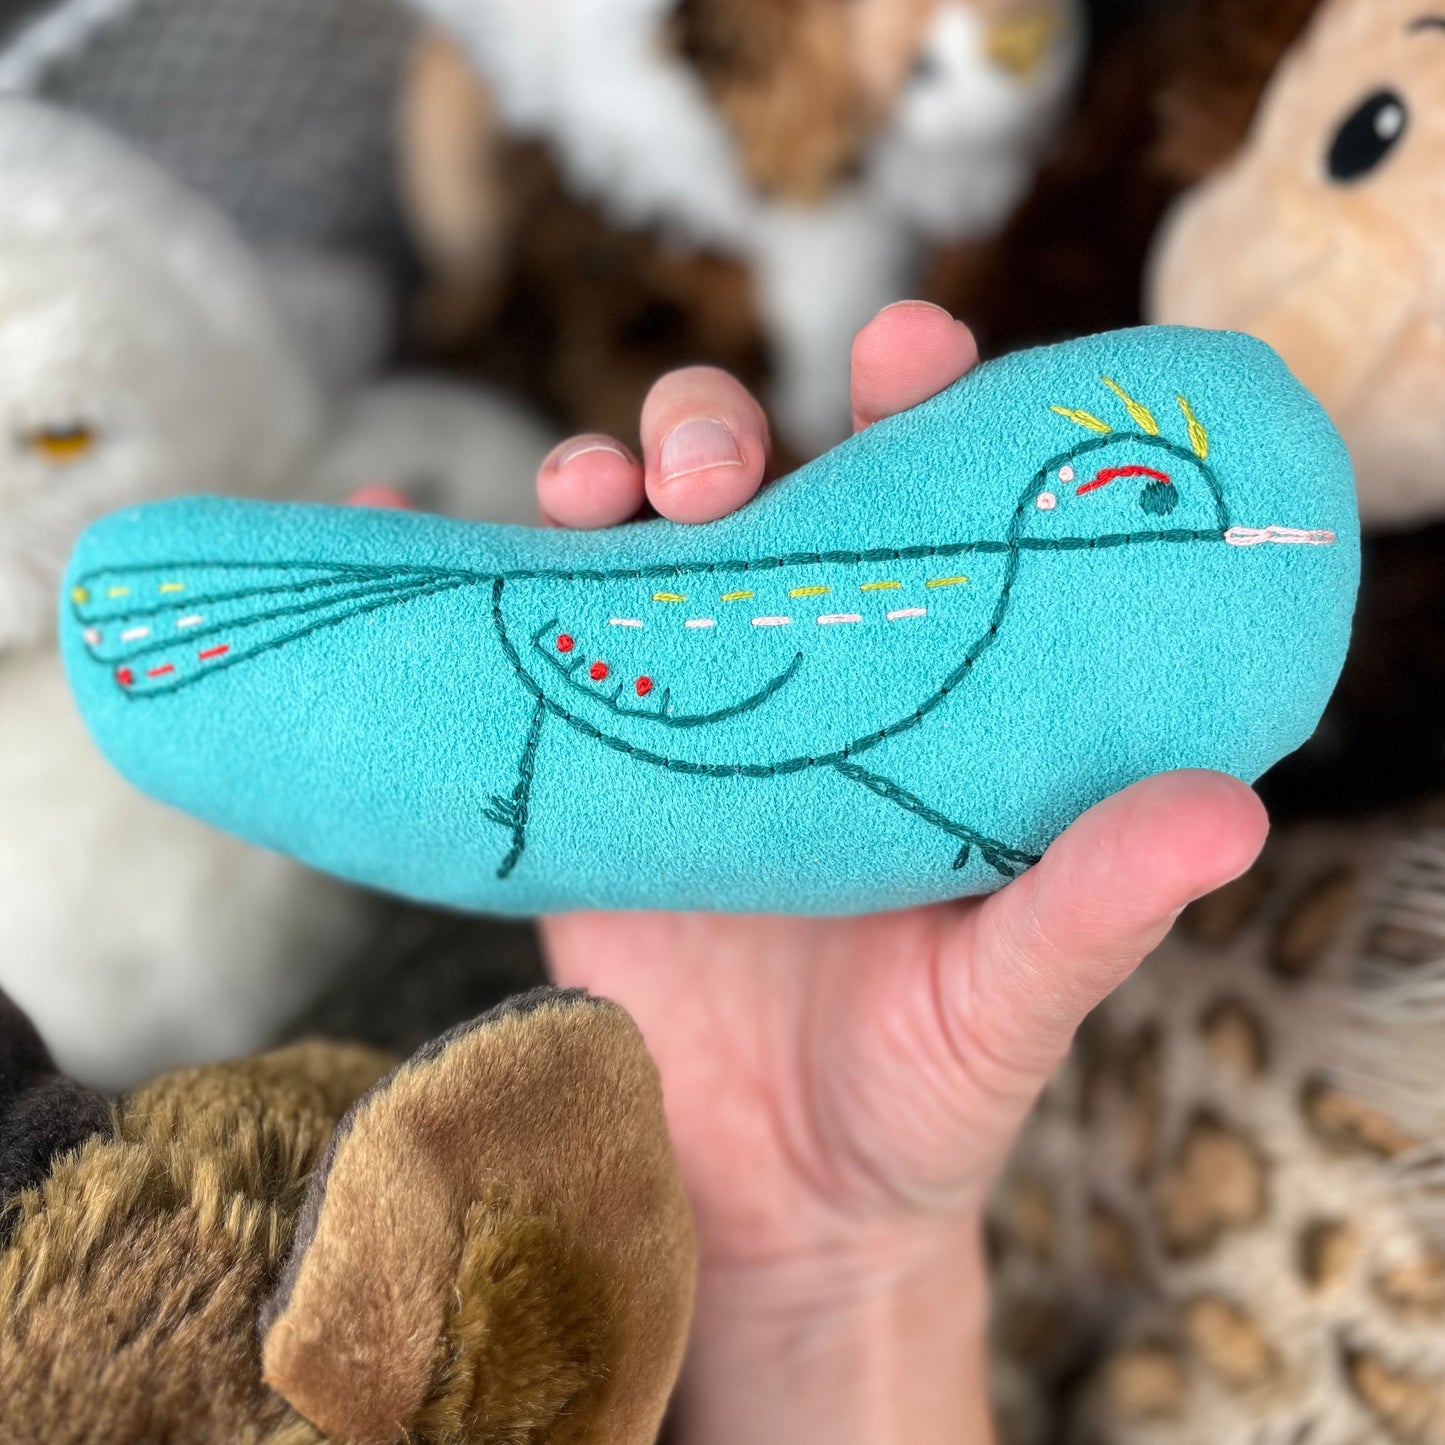 a colorfully hand embroidered stuffed pillow animal of a roadrunner in seafoam green fabric, held in a hand with out-of-focus stuffed animals in the background